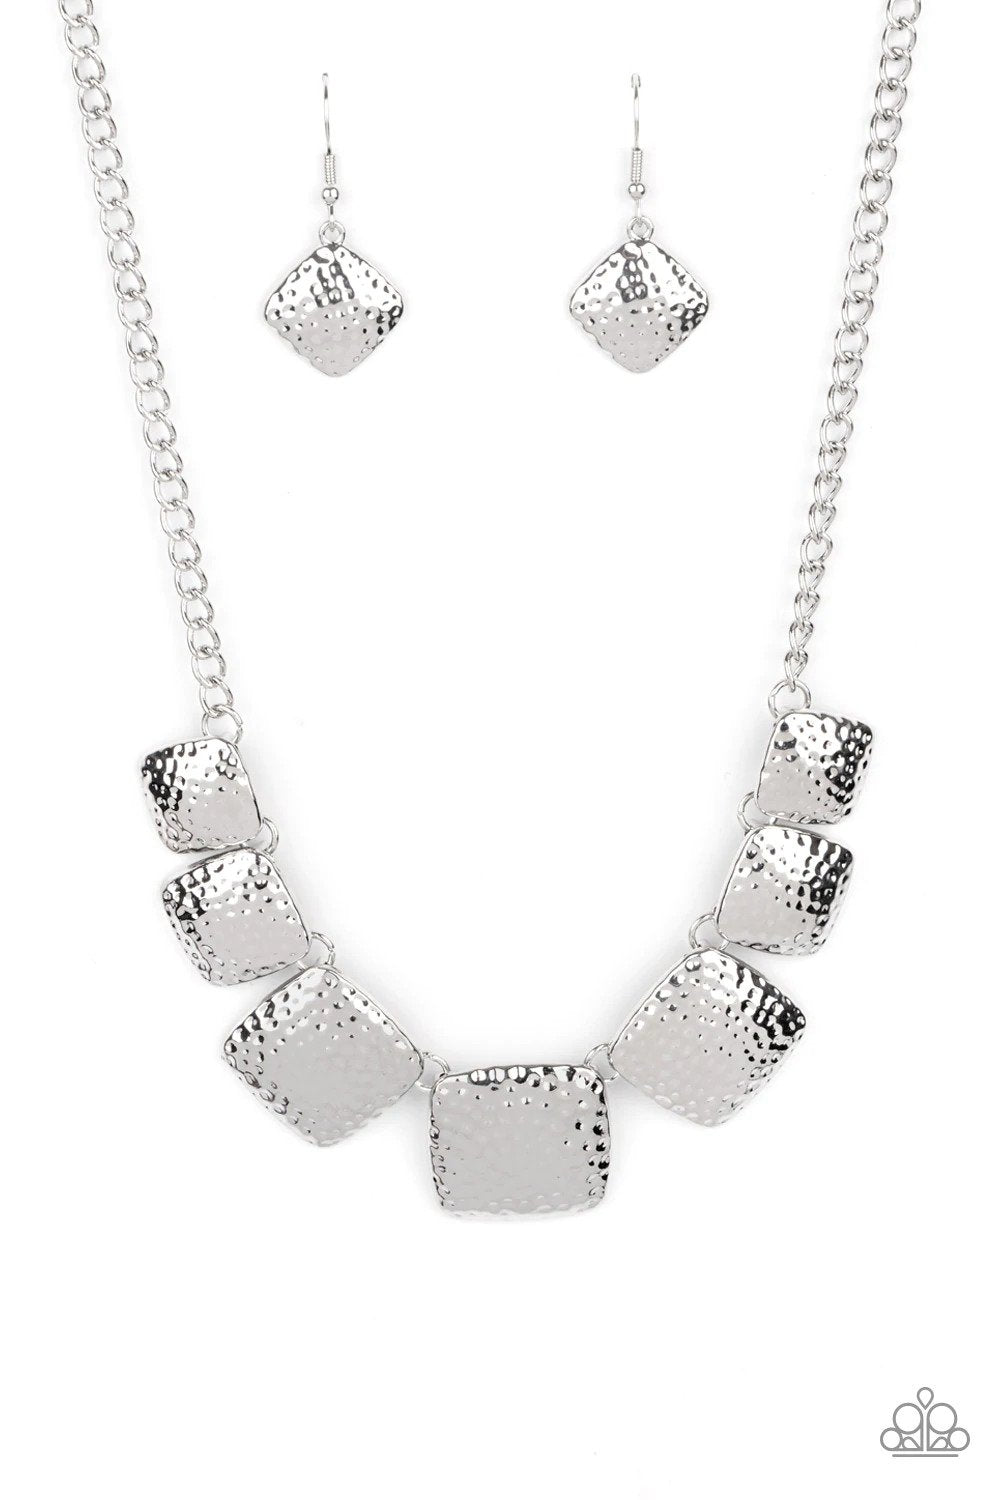 Keeping It RELIC Silver Necklace - Paparazzi Accessories- lightbox - CarasShop.com - $5 Jewelry by Cara Jewels